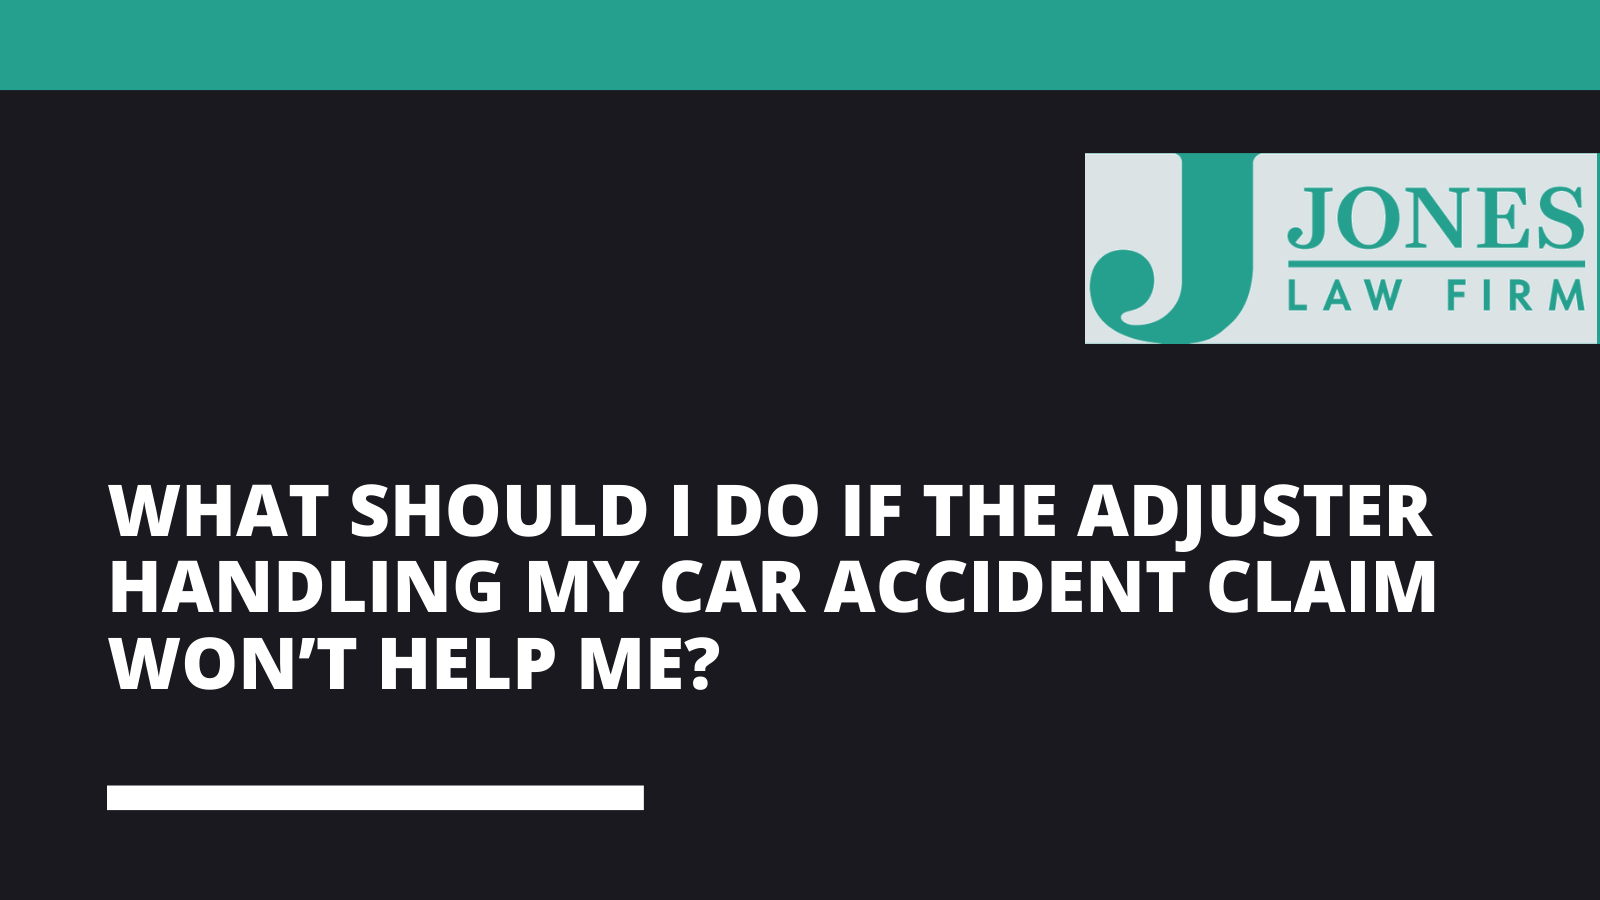 What Should I do if the Adjuster Handling My Car Accident Claim Won’t Help Me - Jones law firm - Alexandria louisiana